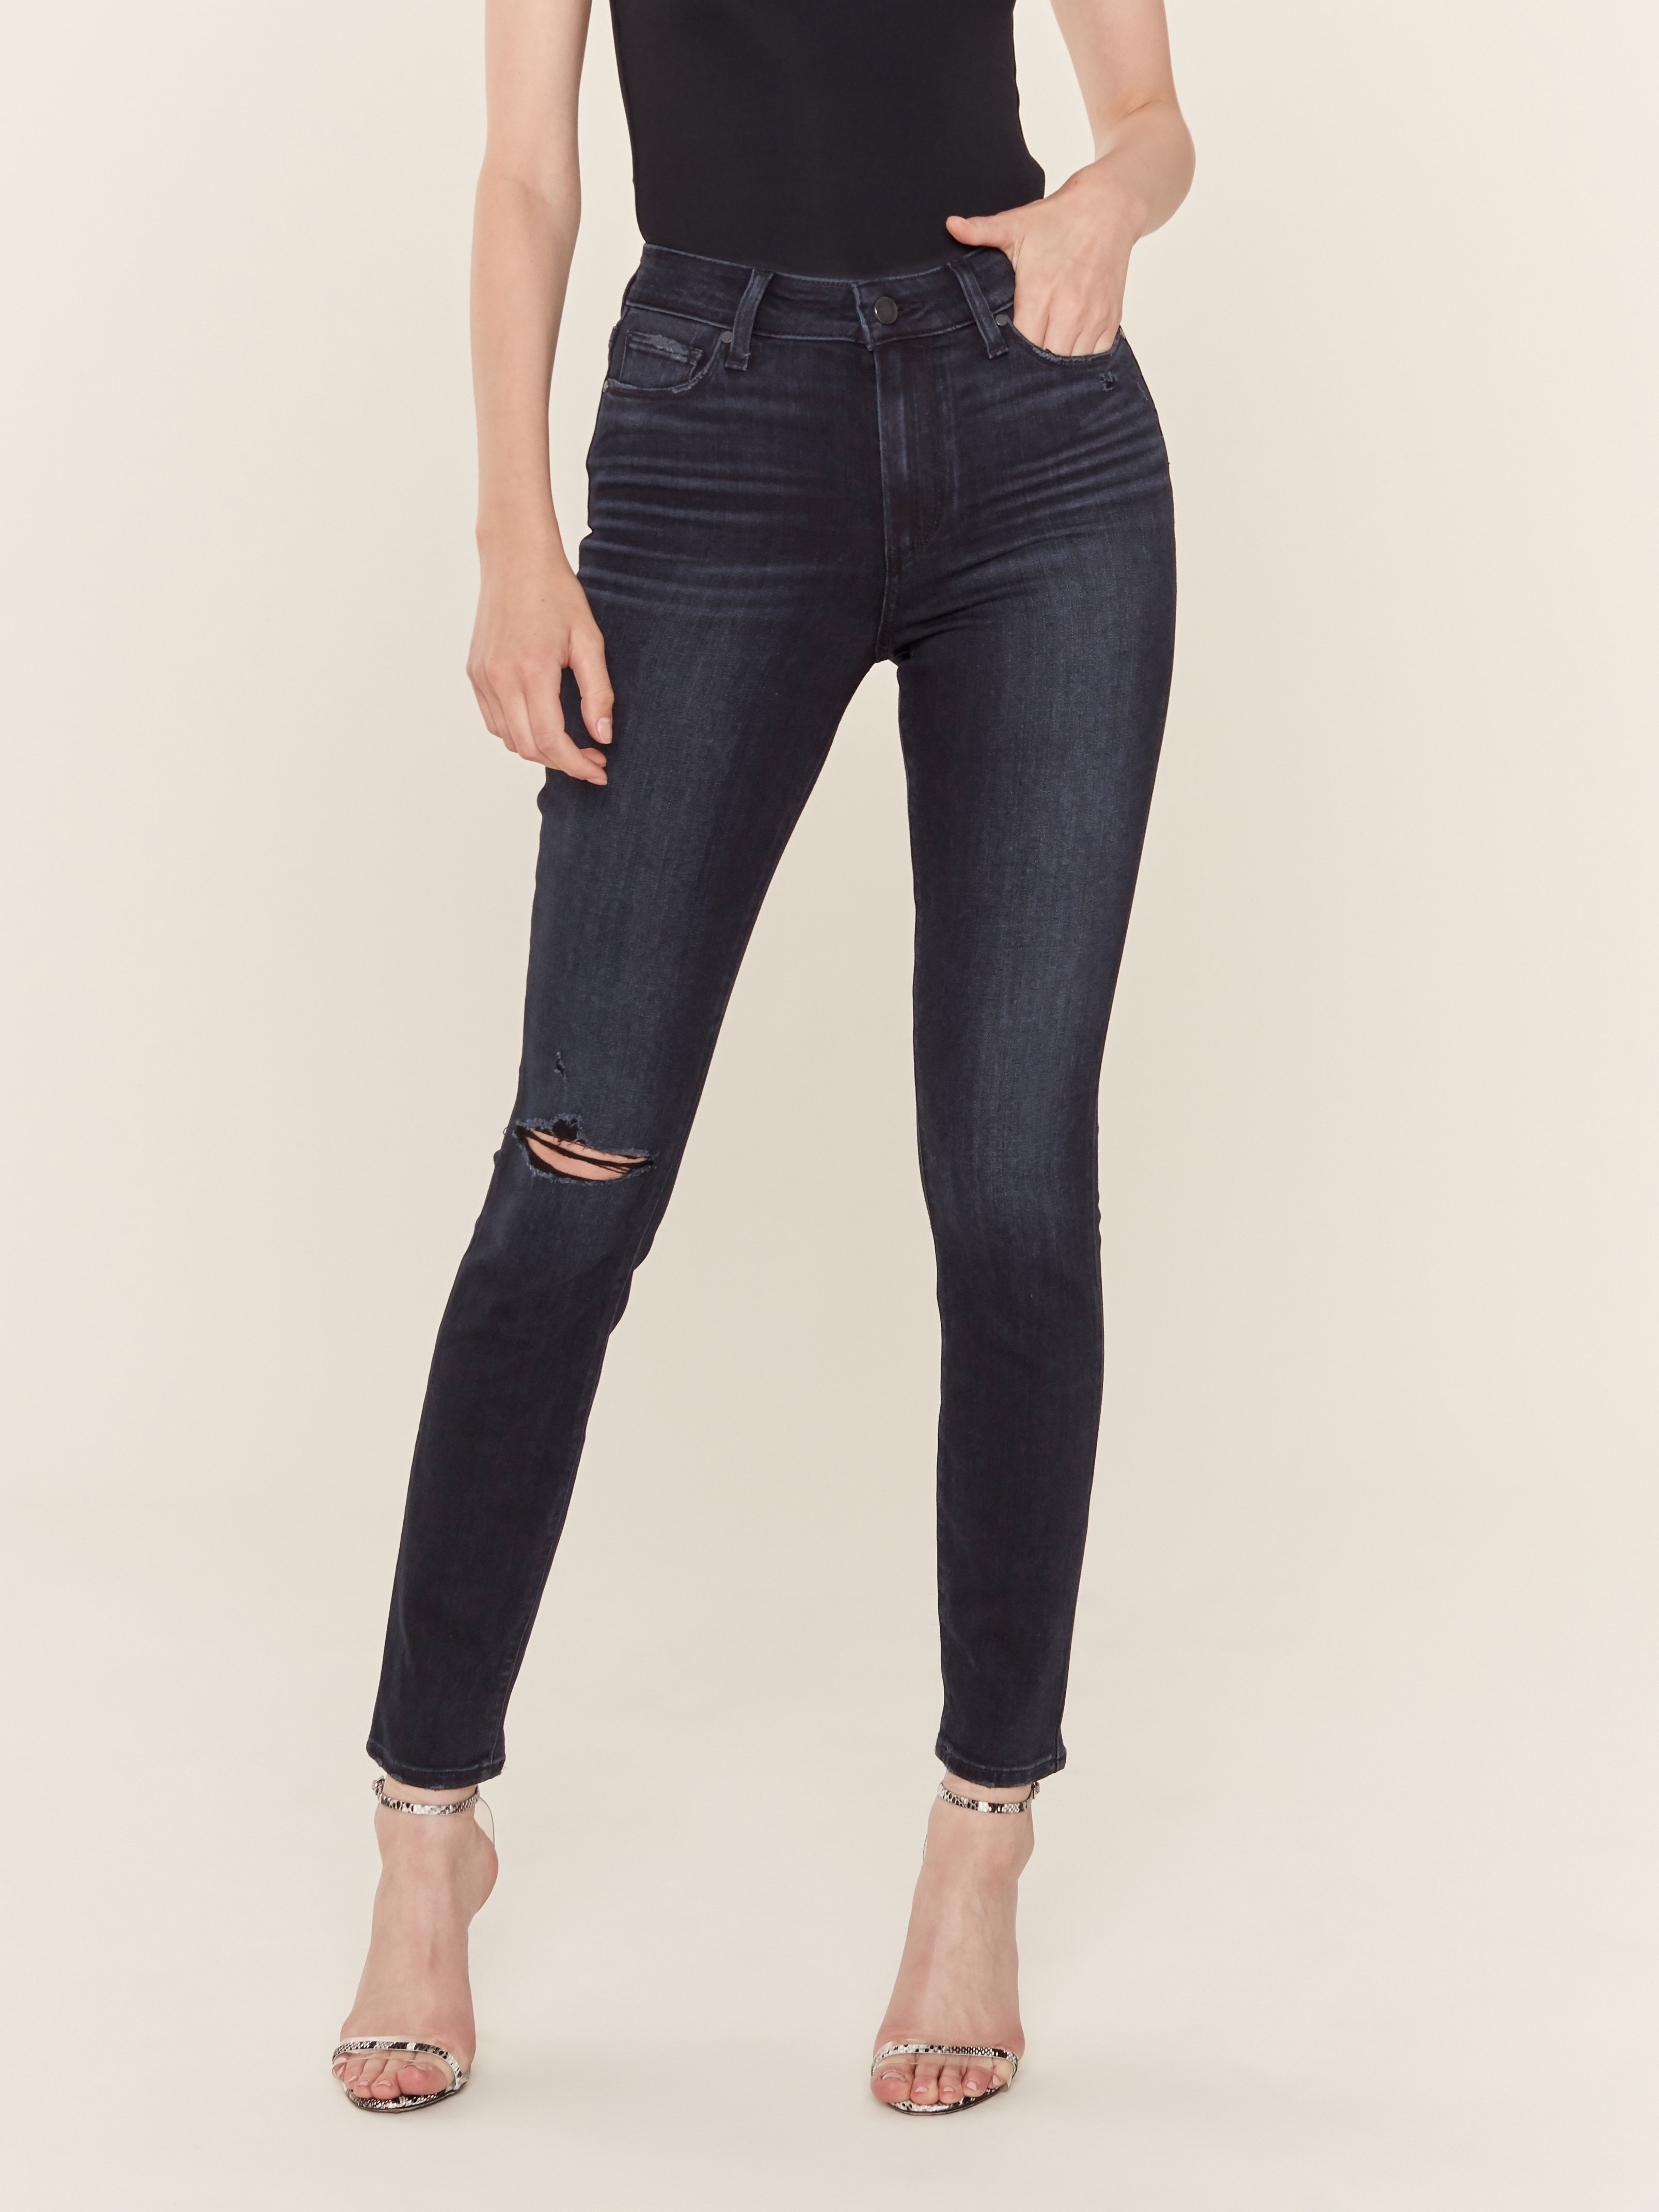 paige hoxton crop high rise ultra skinny